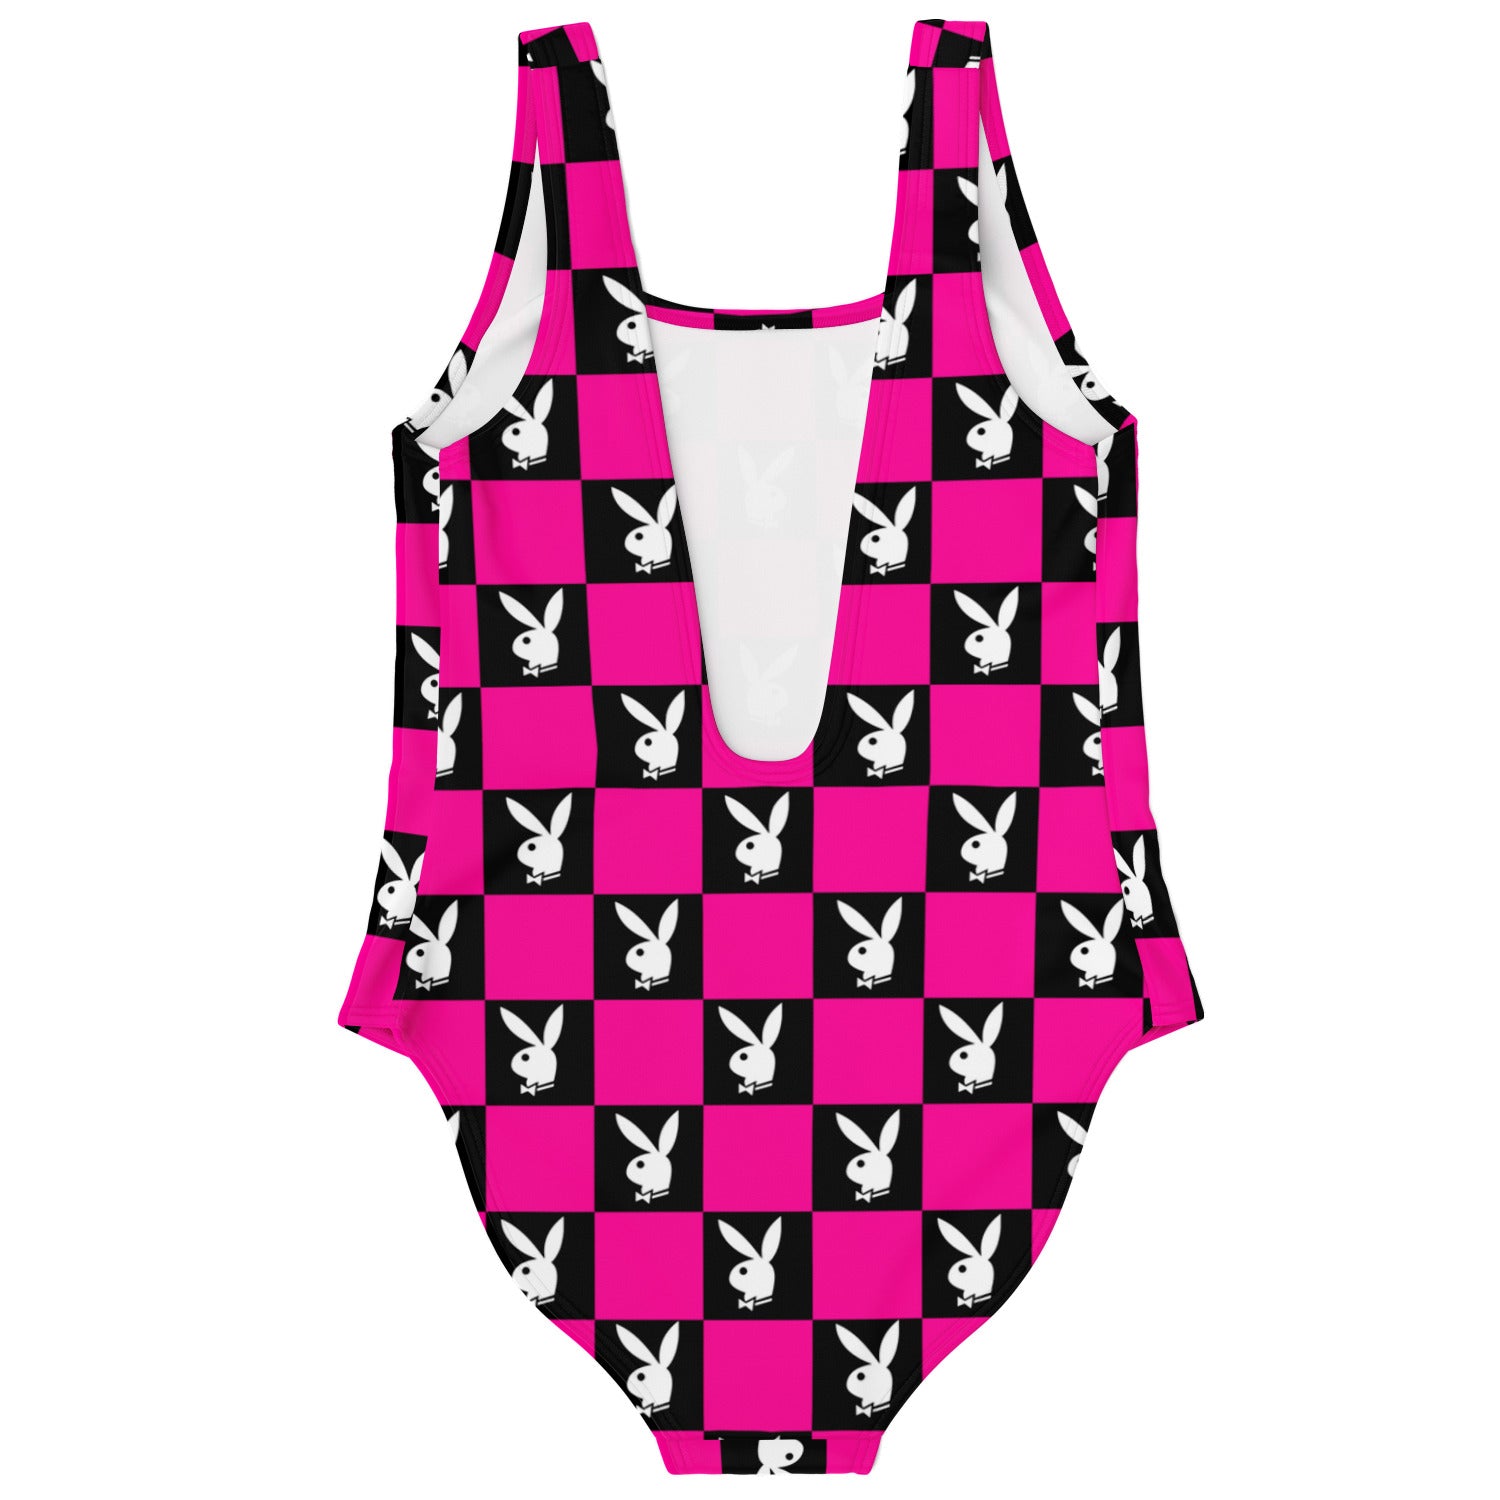 A pink and black checkered Playboy rave bodysuit.